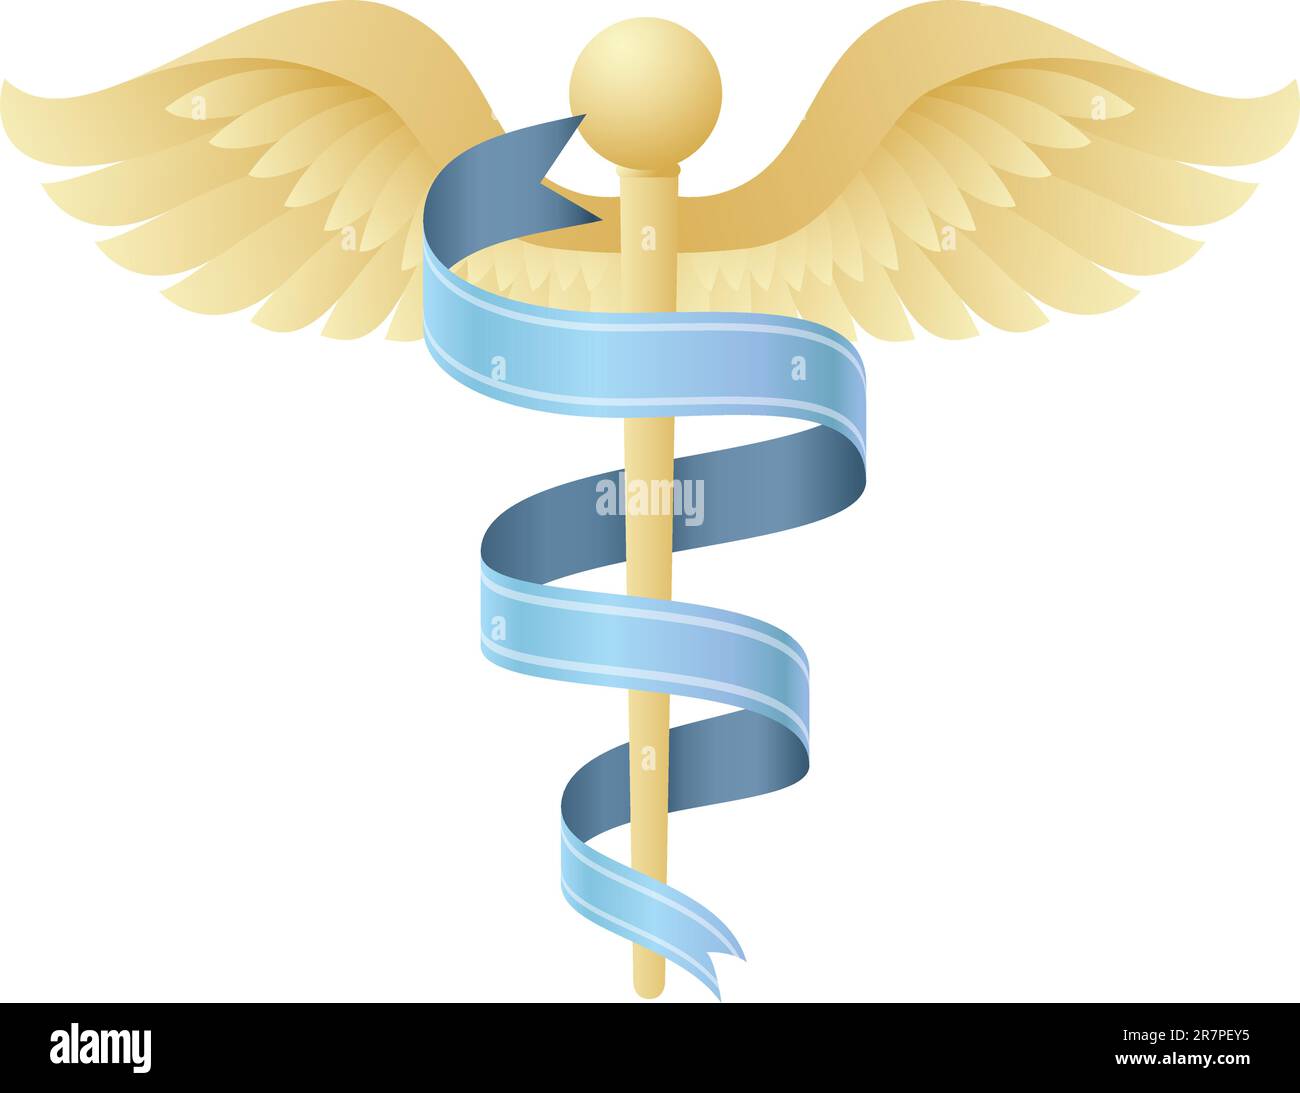 Vector Illustration of a modern medical symbol like the traditional Caduceus emblem of health,medicine,hospitals,doctors,ambulances.Icon can also r... Stock Vector